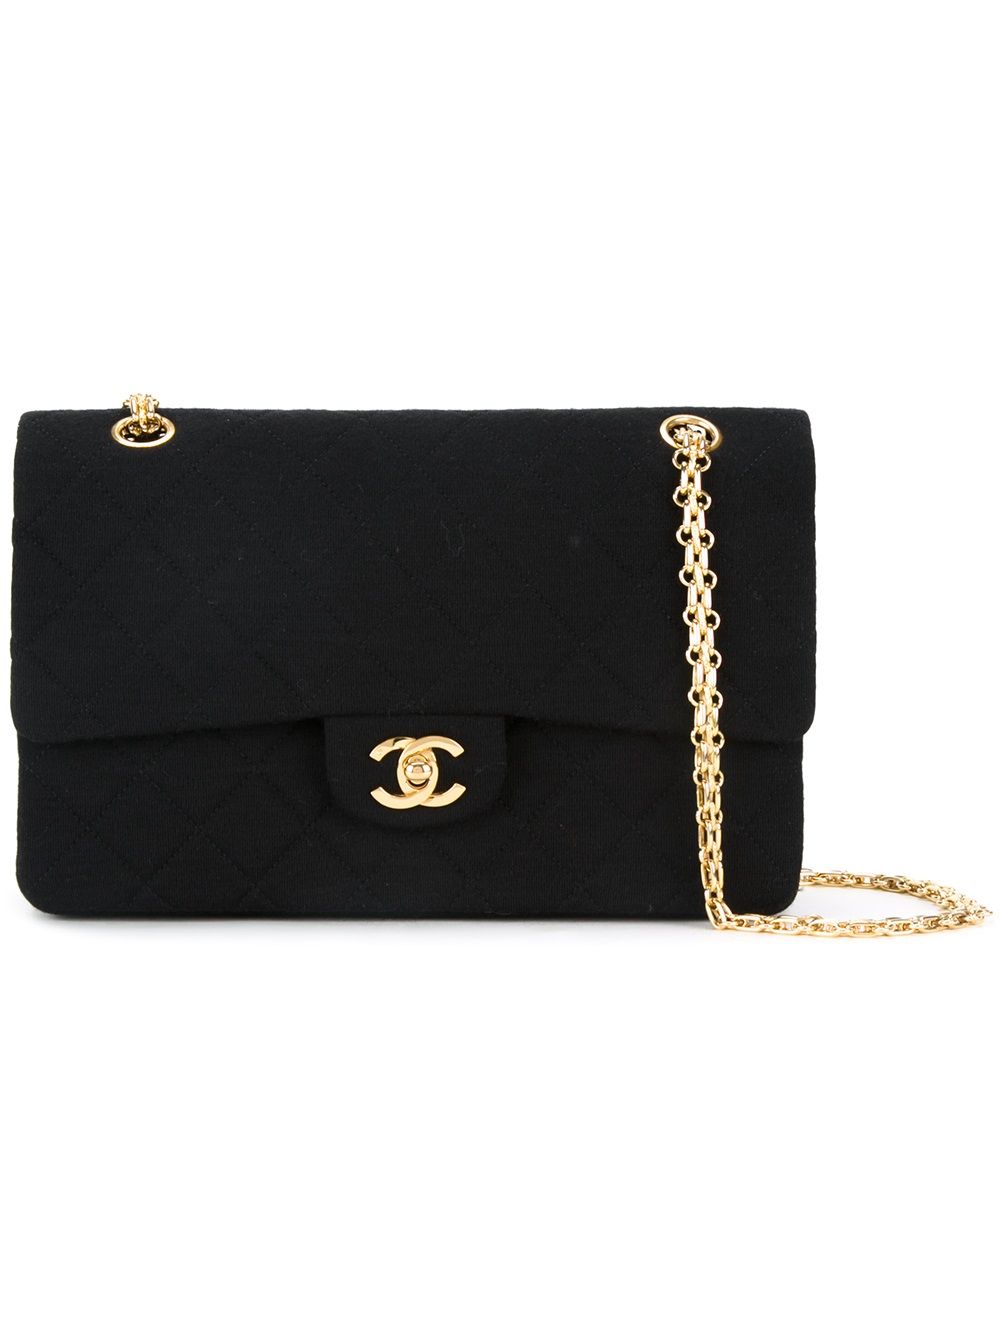 Chanel Pre Owned 2014-2015 mini square Classic Flap shoulder bag